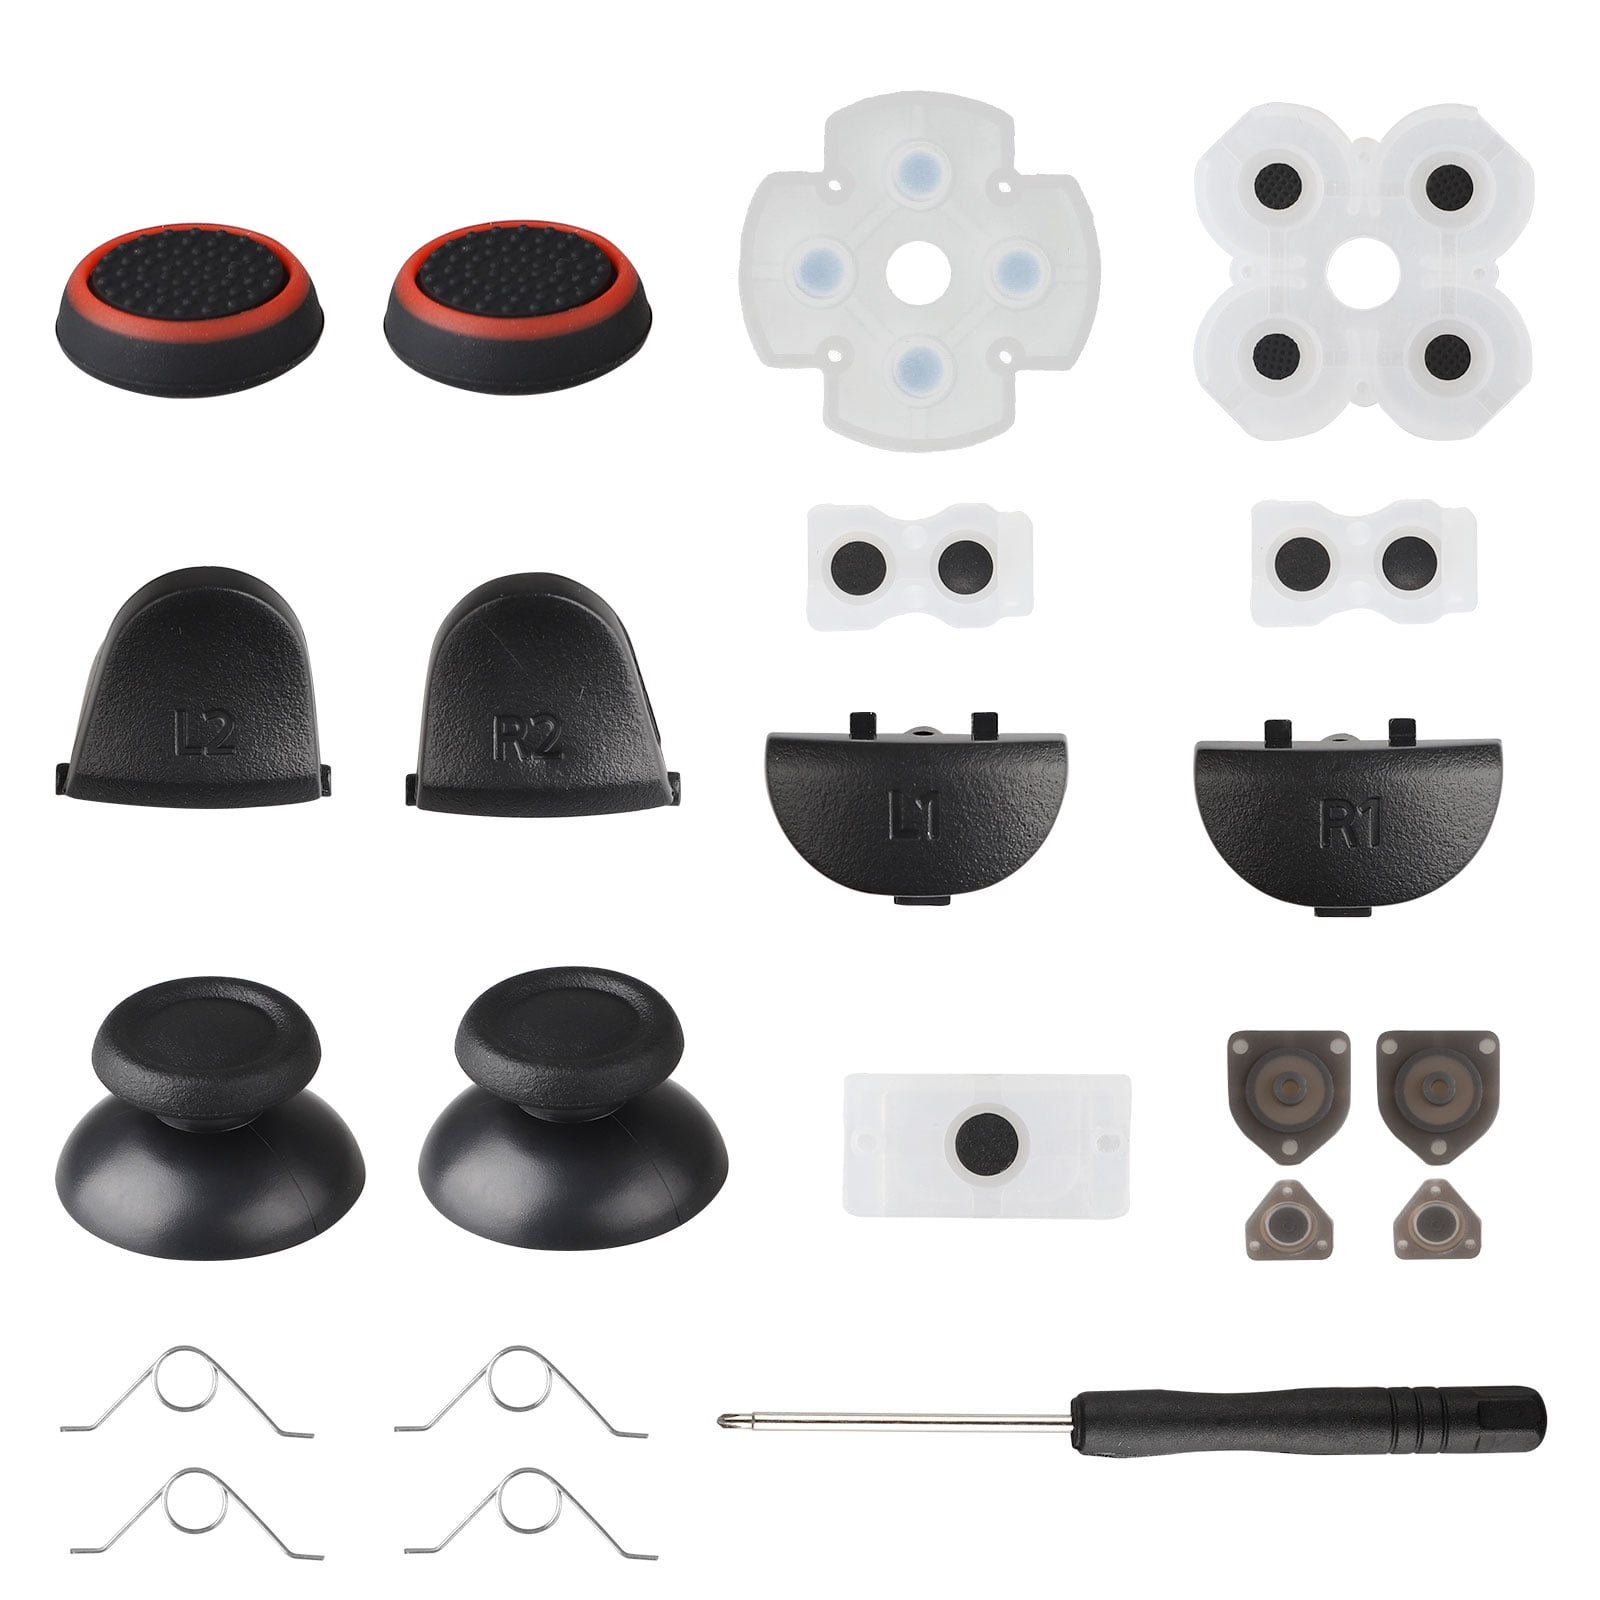 Conductive Rubber Pads PS4, TSV 20 in 1 Replacement Parts and Repair Tools Kit Fit for Sony 4 PS4 Controller w/ Thumbsticks, L2 R2 L1R1 Triggers, ABXY Buttons,